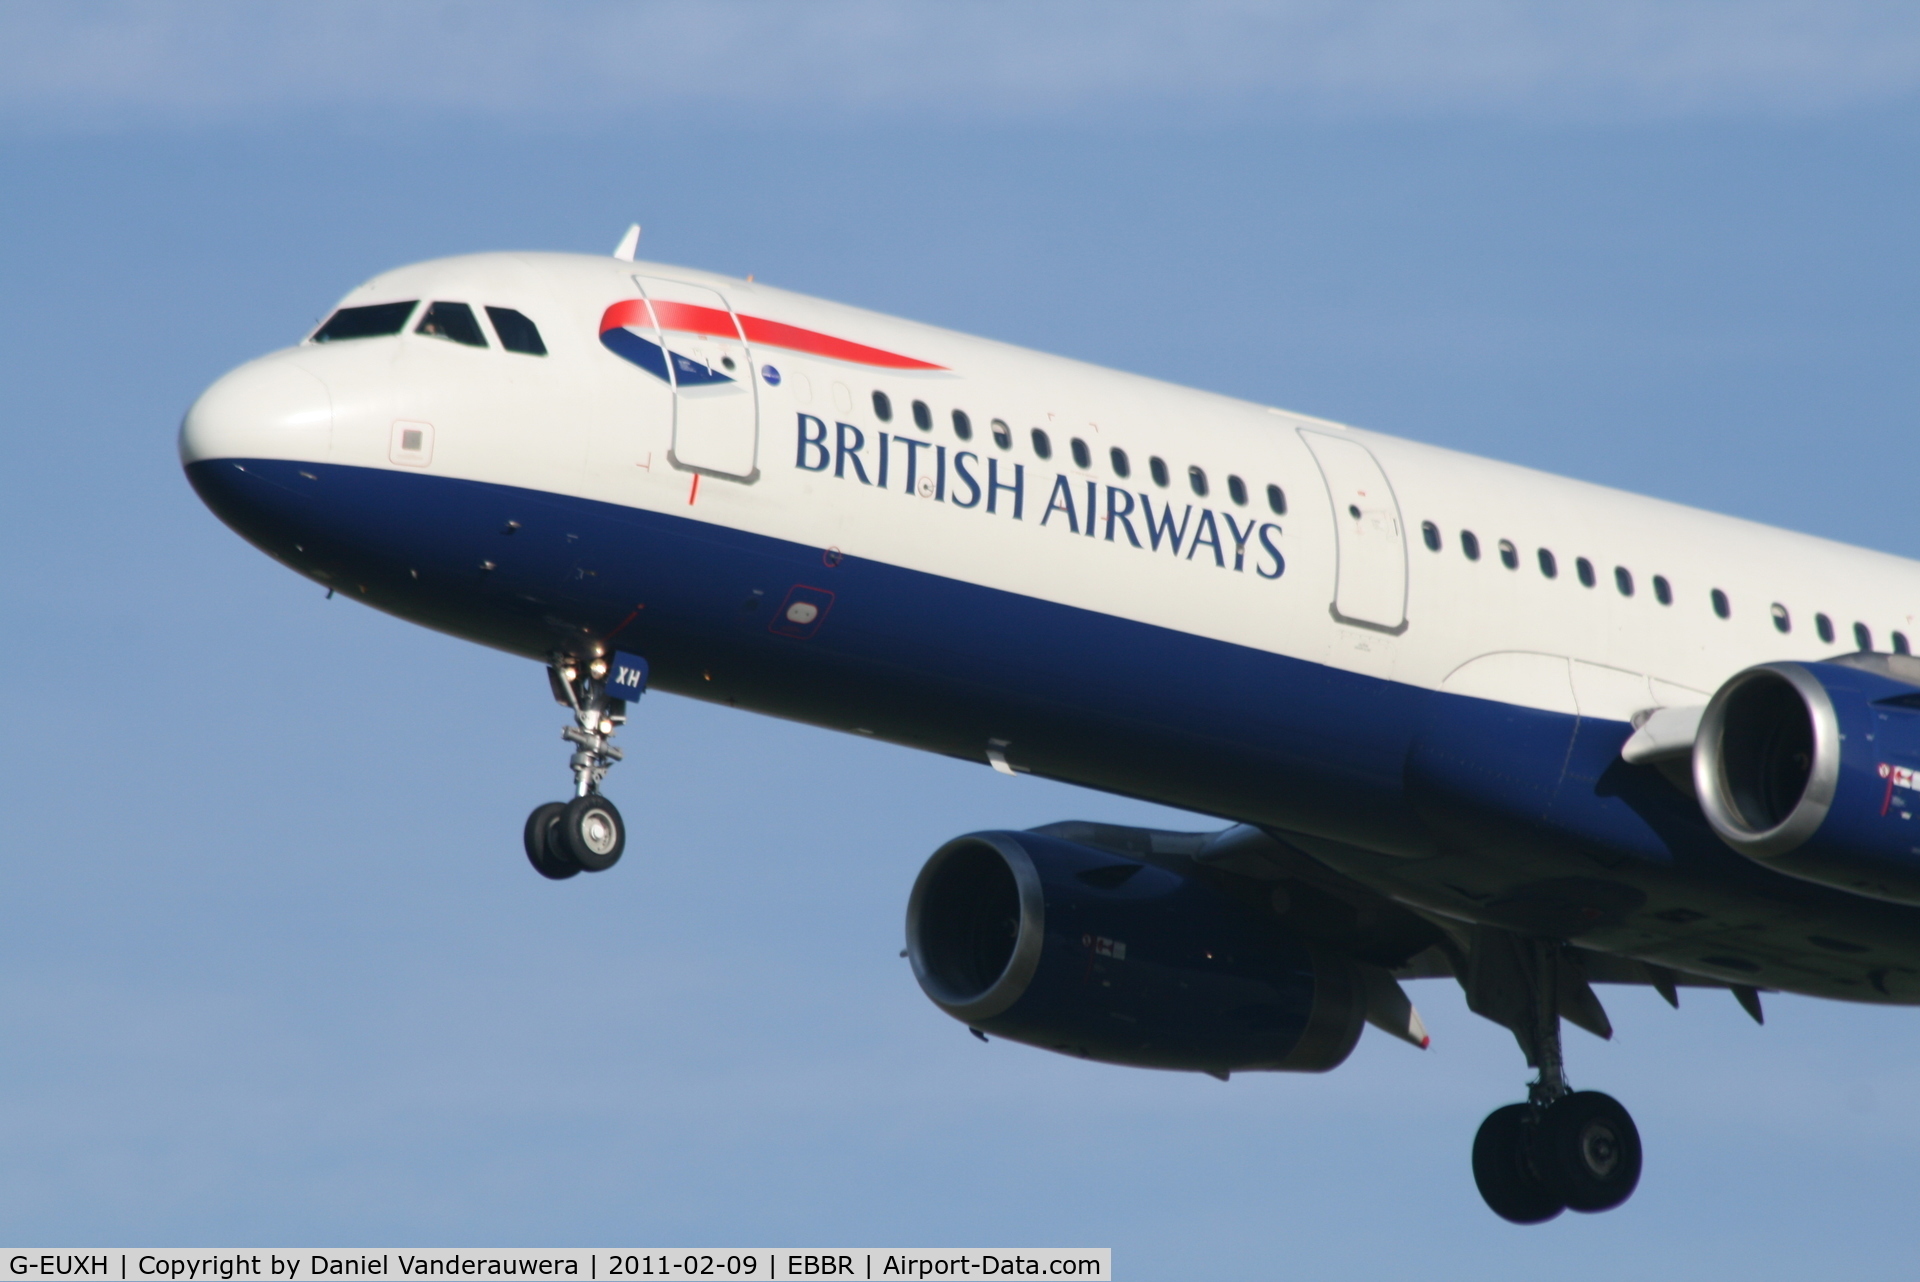 G-EUXH, 2004 Airbus A321-231 C/N 2363, Arrival of flight BA394 to RWY 25L